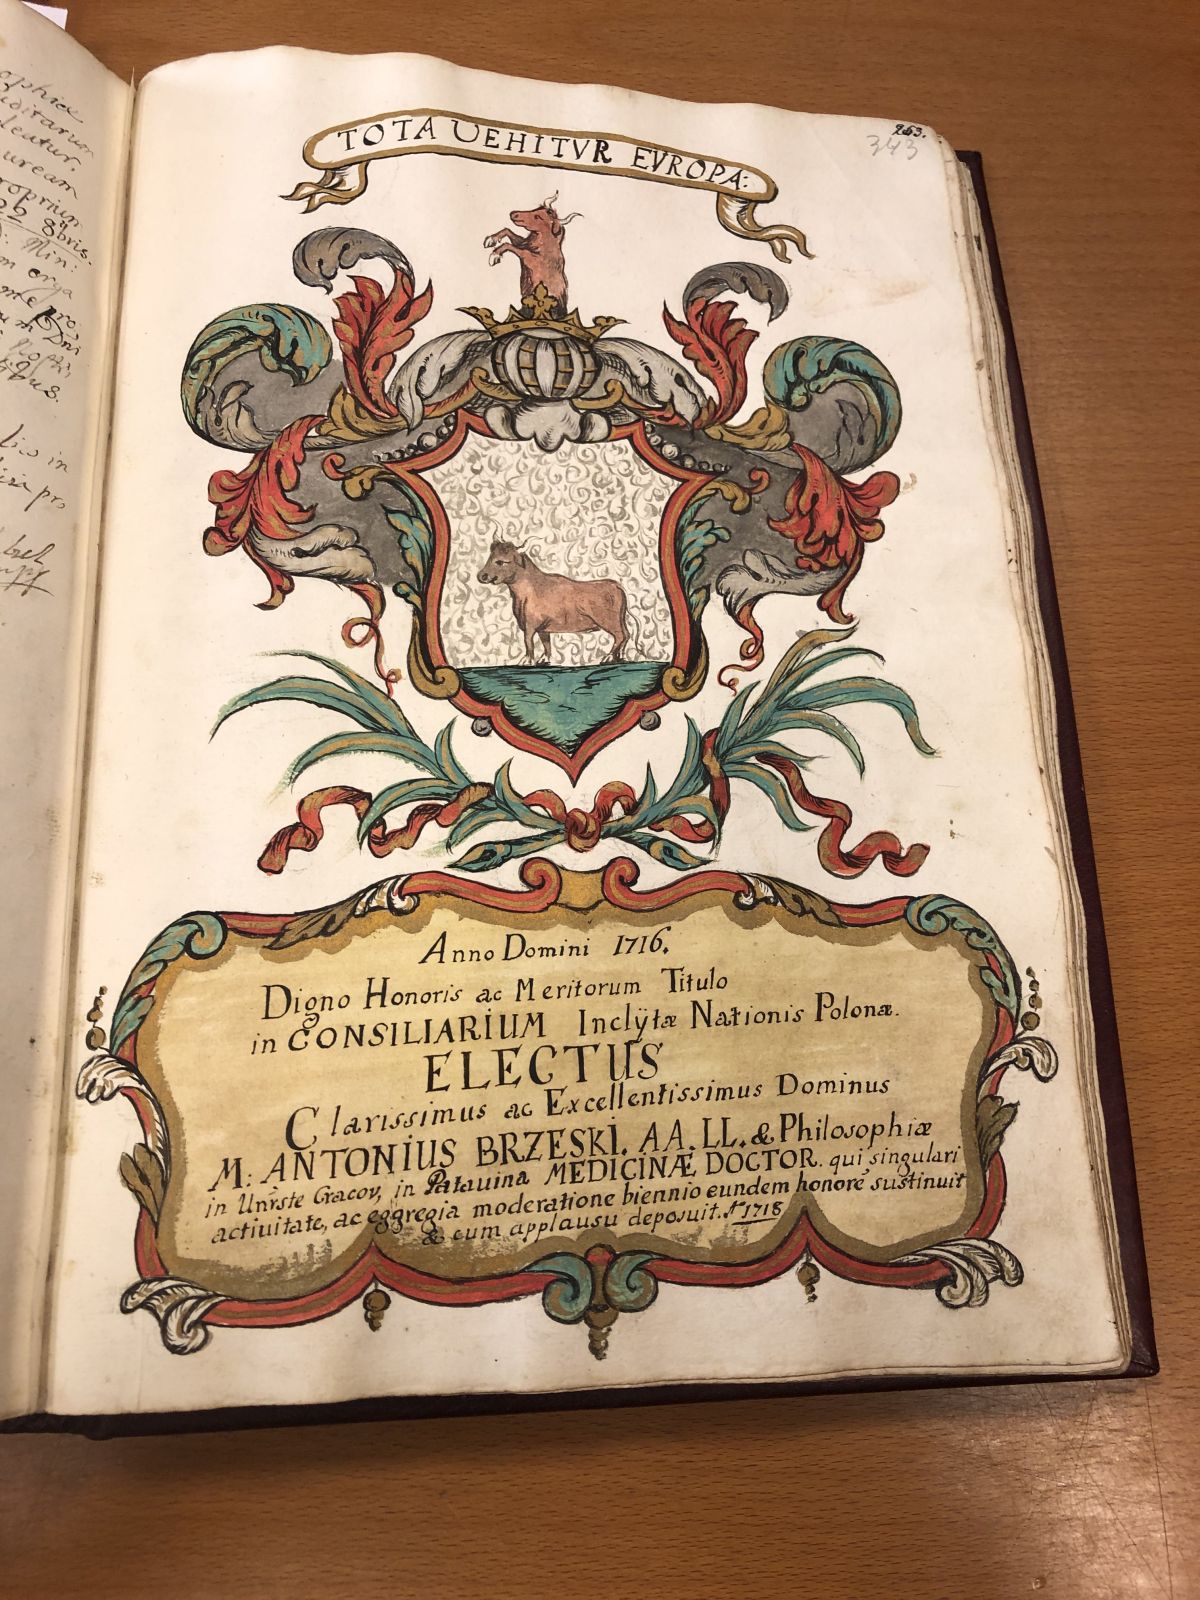 A book full of Polish coats of arms - metrics of the Polish nation in the Archive of the University of Padua